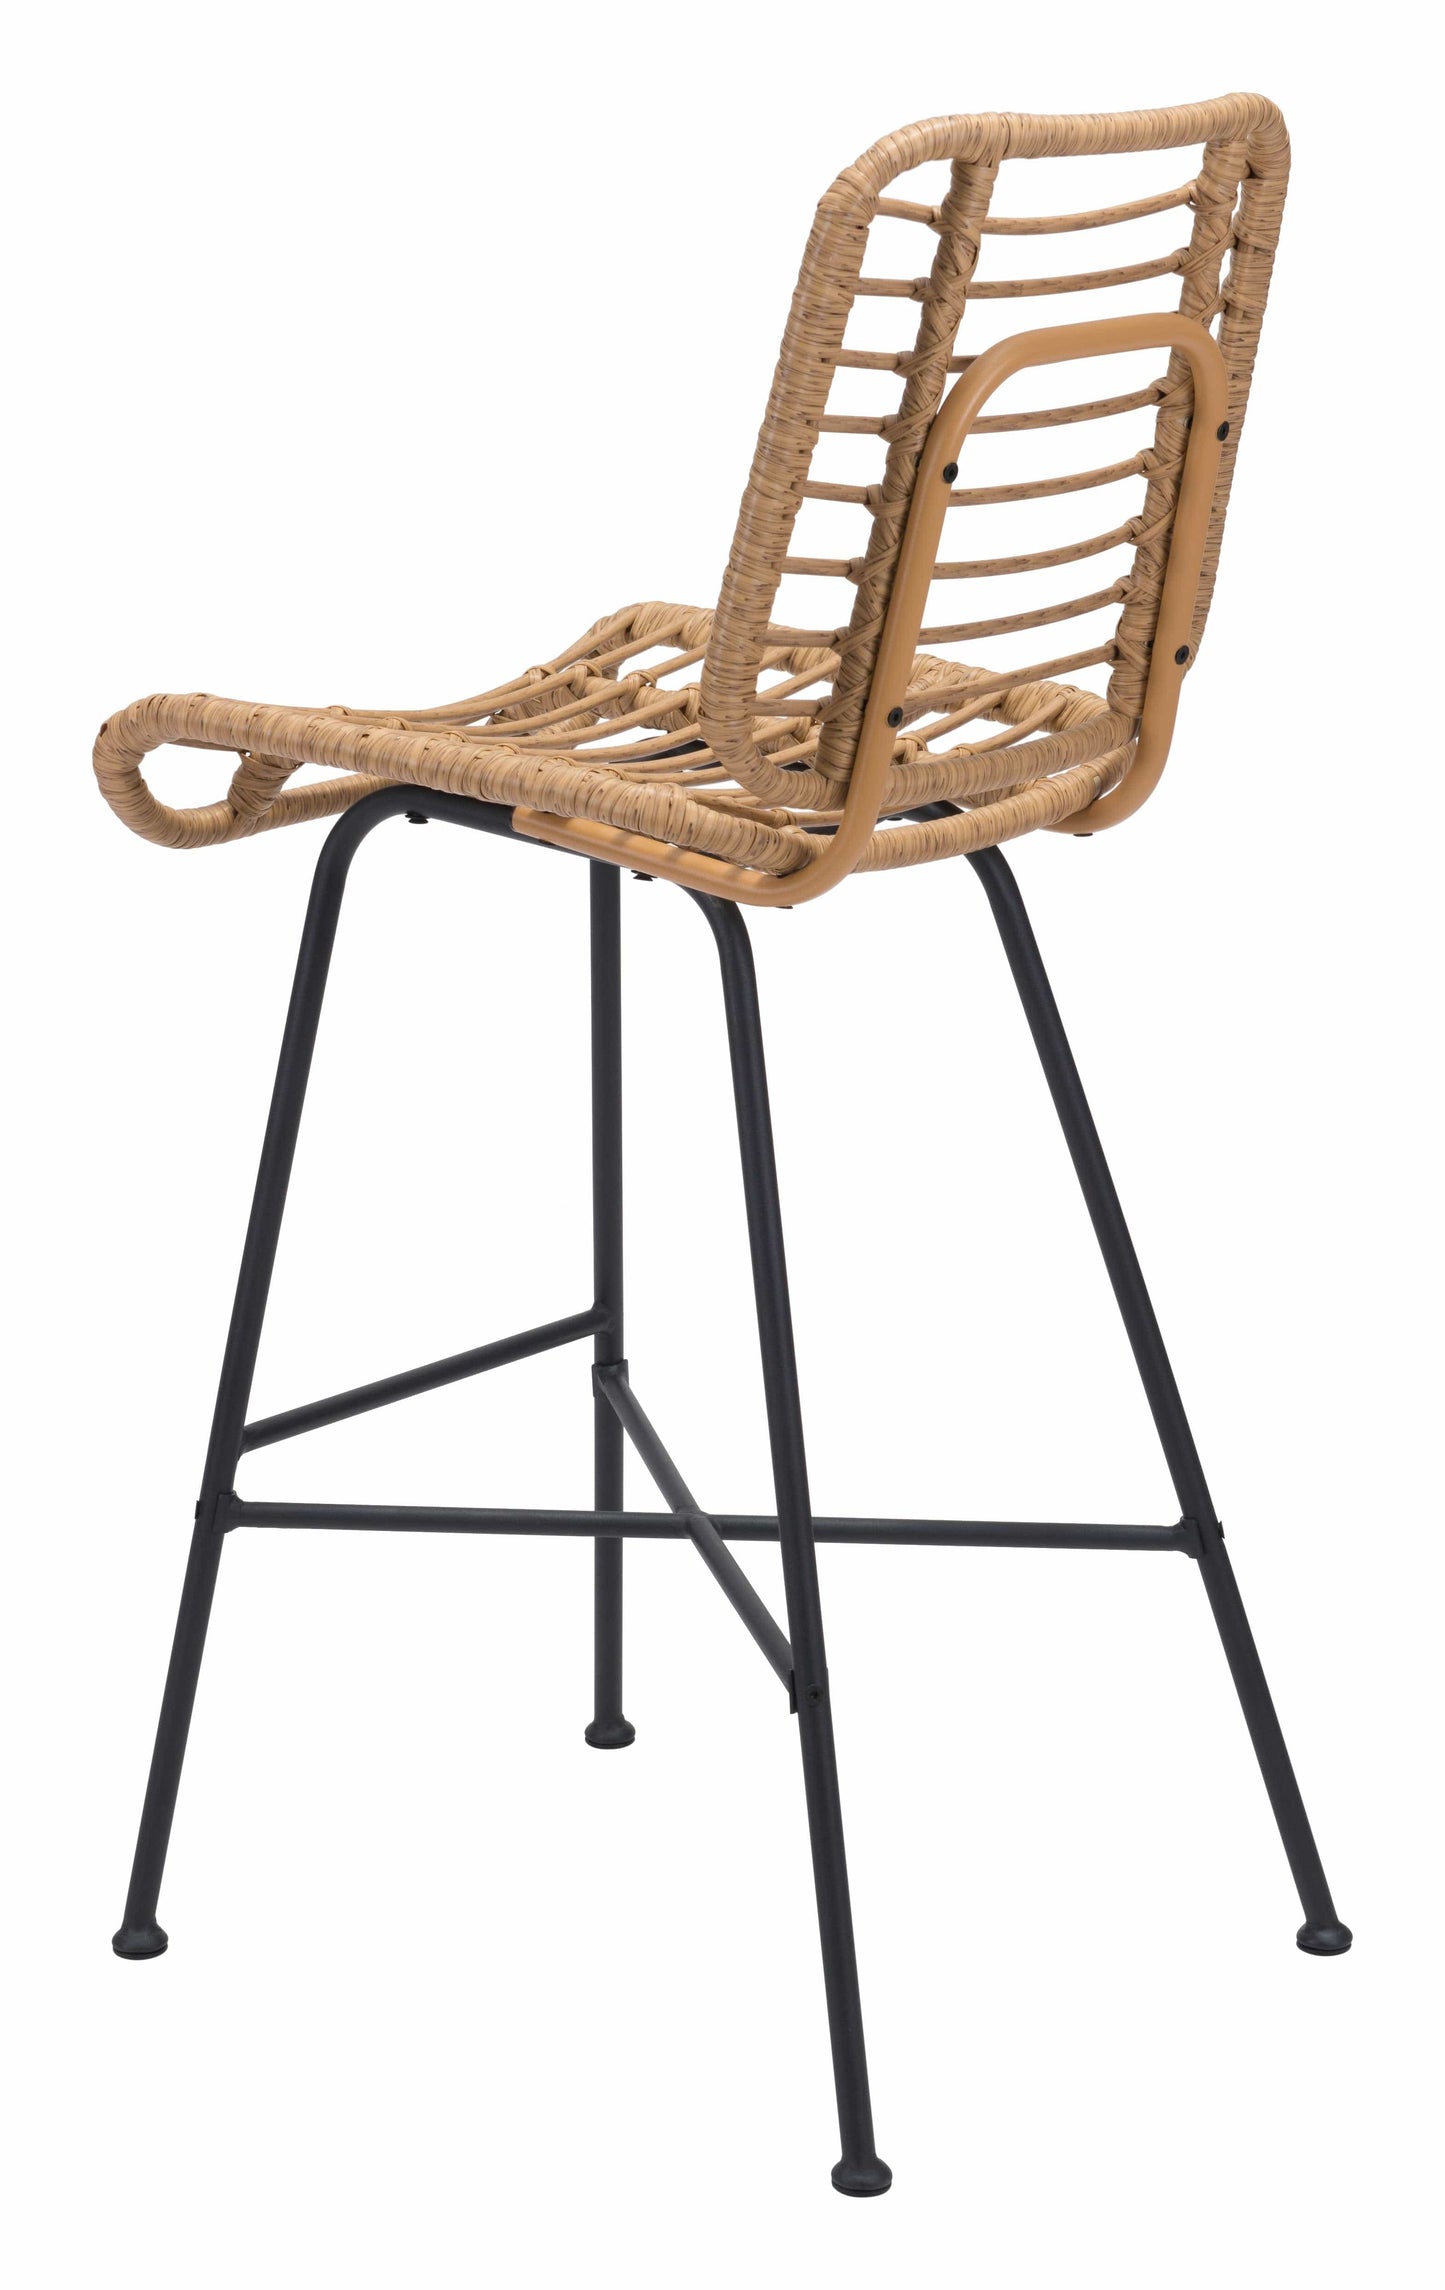 Materials - Powder Coated Steel, Synthetic Rattan Weave Polyethylene